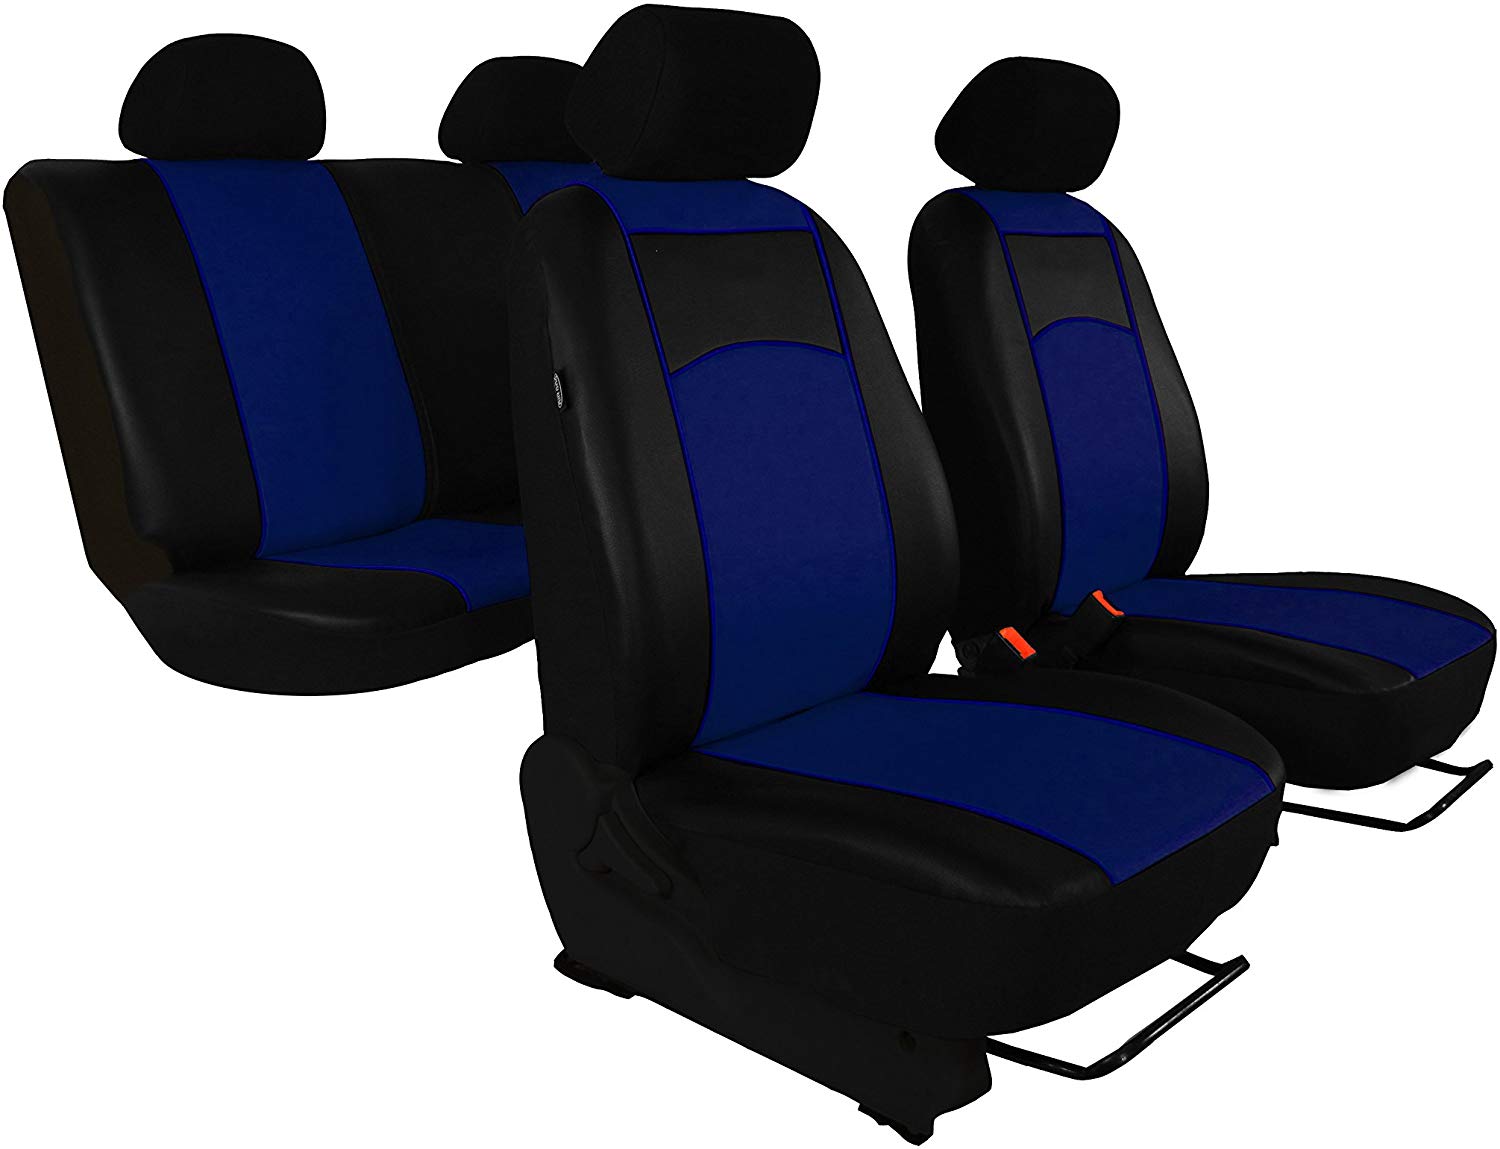 \'Universal Imitation Leather Seat Cover Set for Vauxhall Astra II/III Design Faux Leather with Decorative Tuning in this listing. Blue.